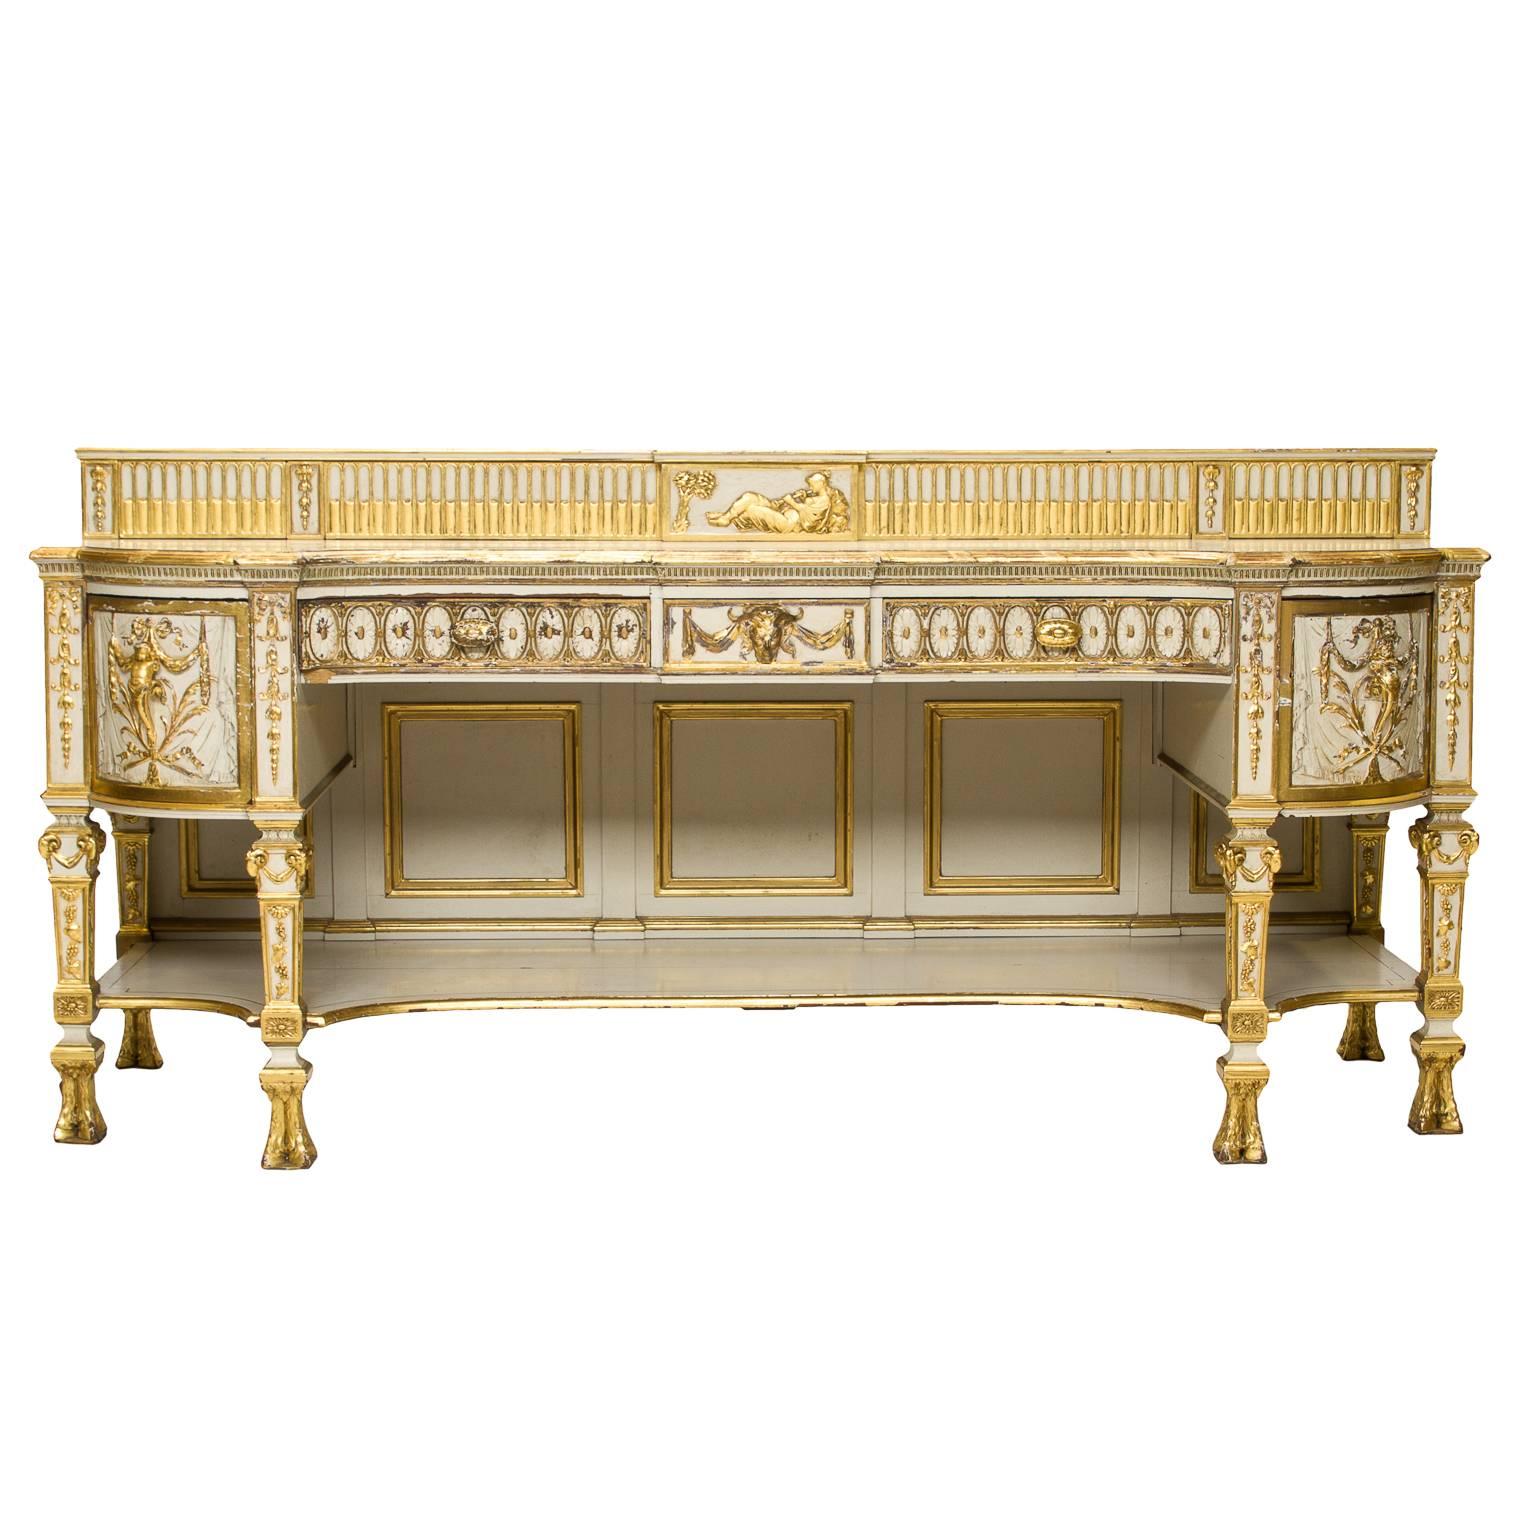 19th Century Neoclassical Style Painted Sideboard